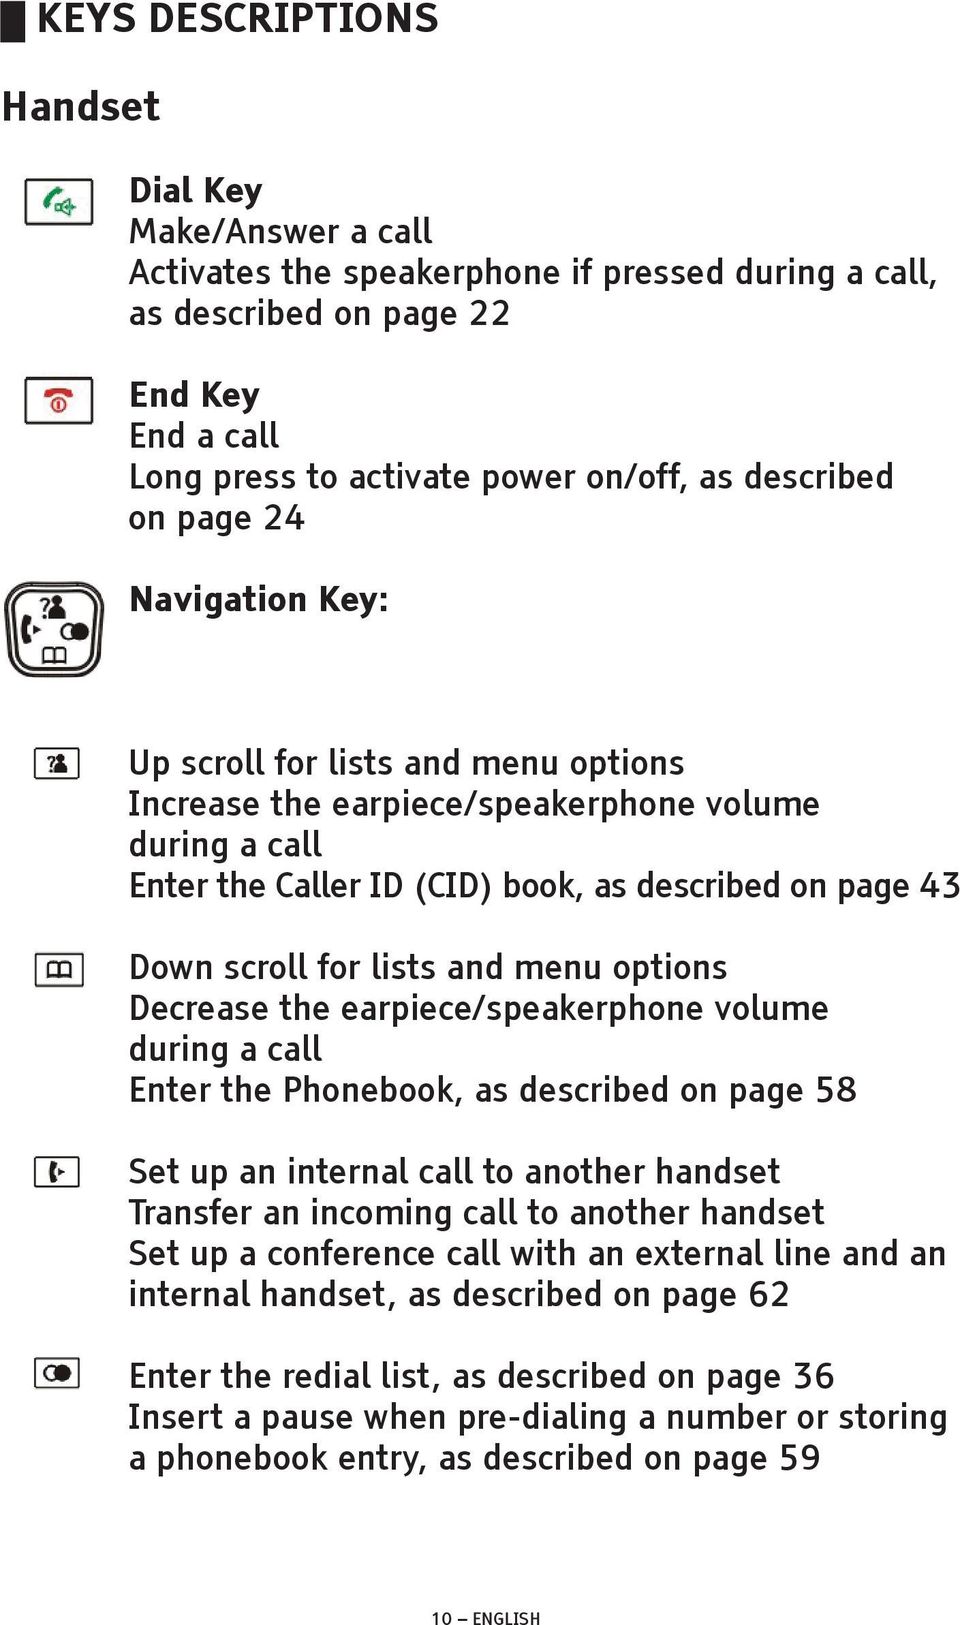 and menu options Decrease the earpiece/speakerphone volume during a call Enter the Phonebook, as described on page 58 Set up an internal call to another handset Transfer an incoming call to another